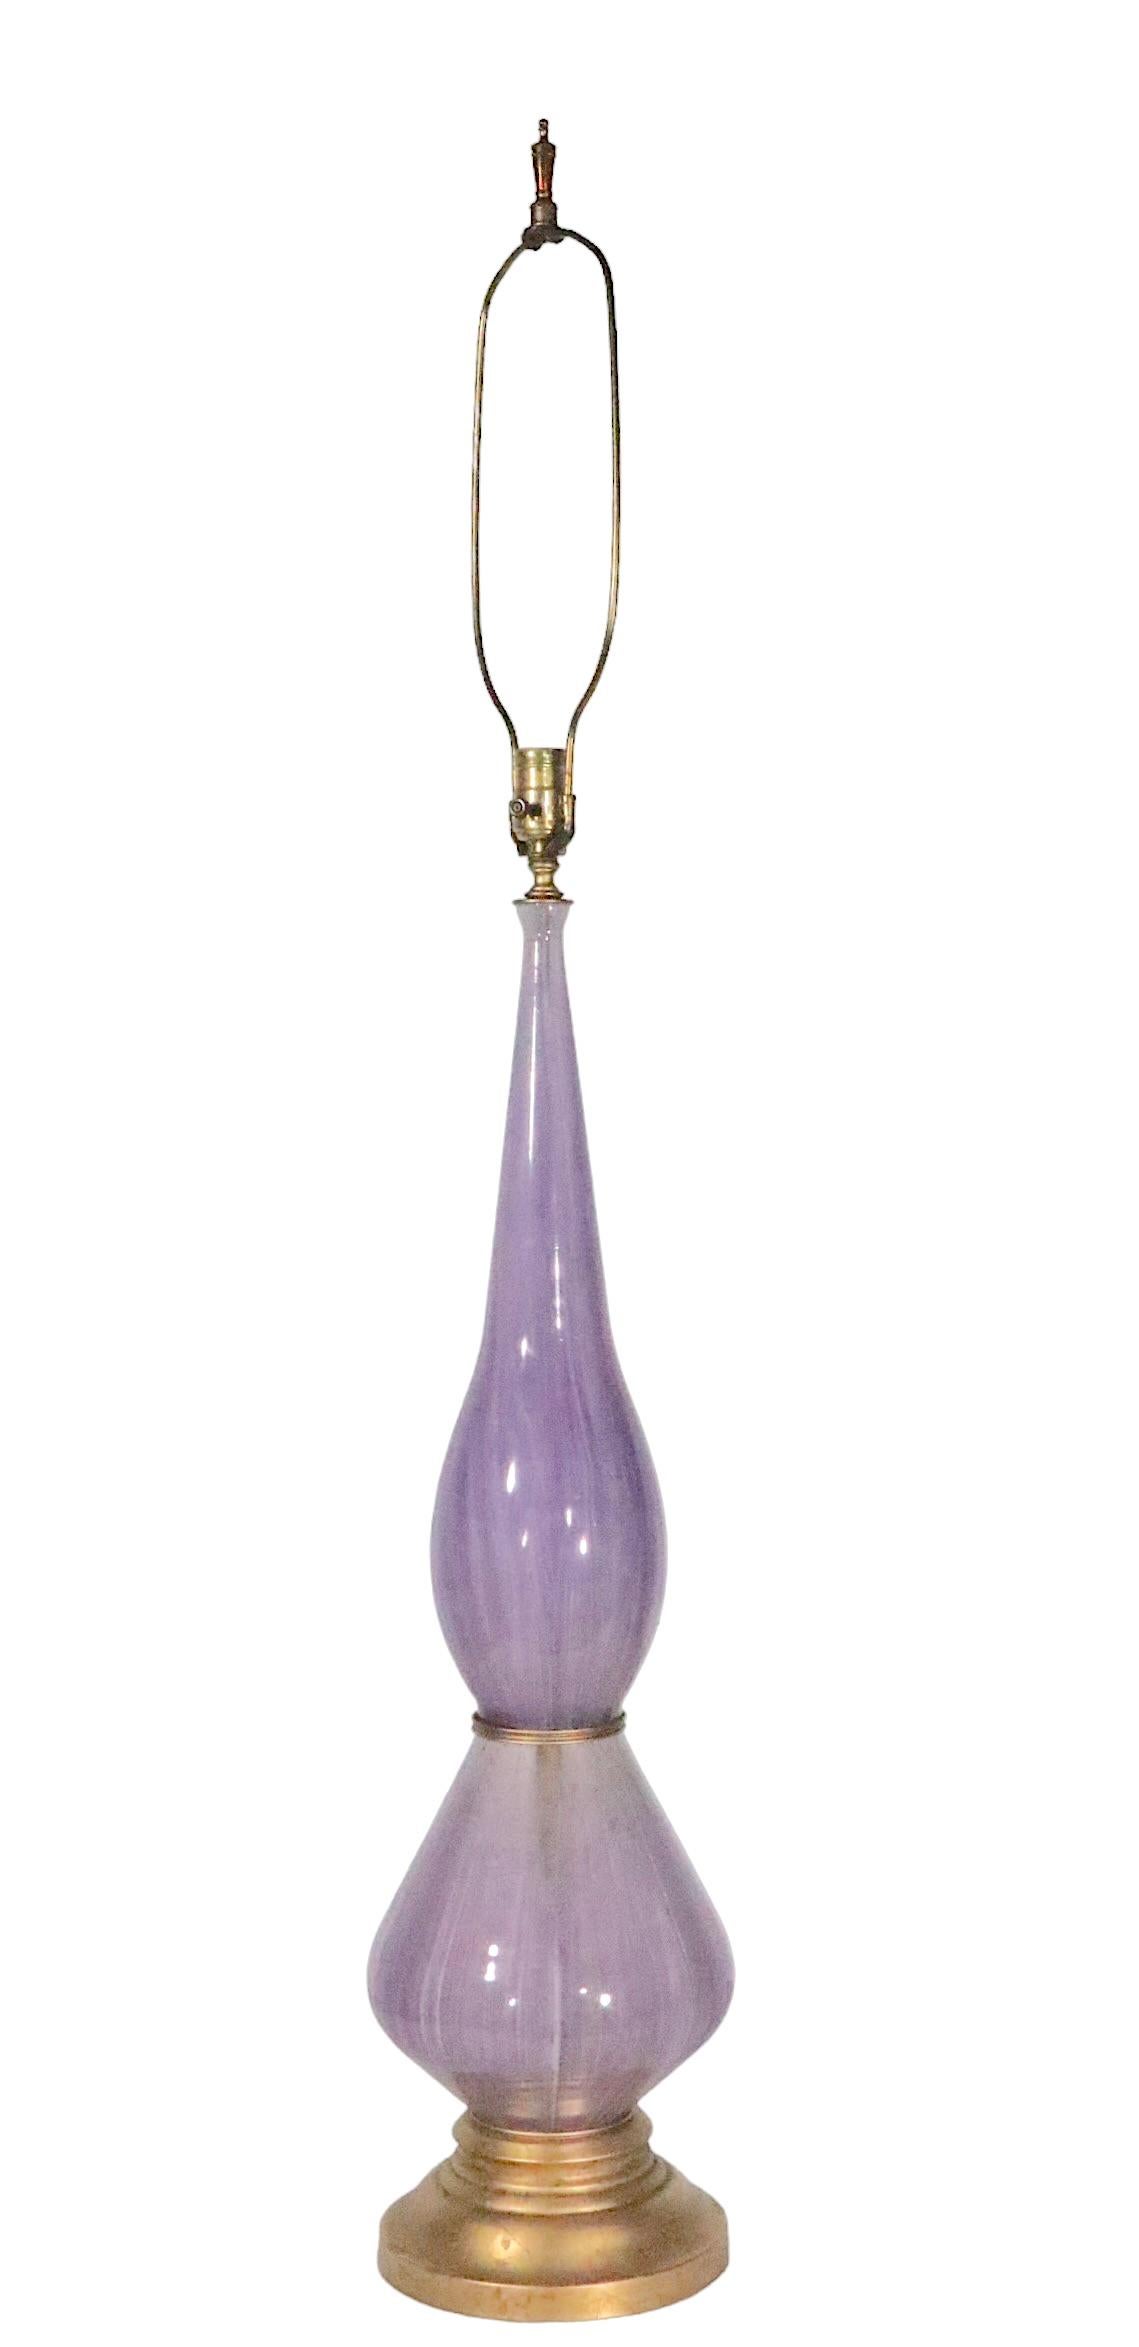 Large Murano Glass Table Lamp in Lavender Glass, circa 1950/1960s For Sale 8